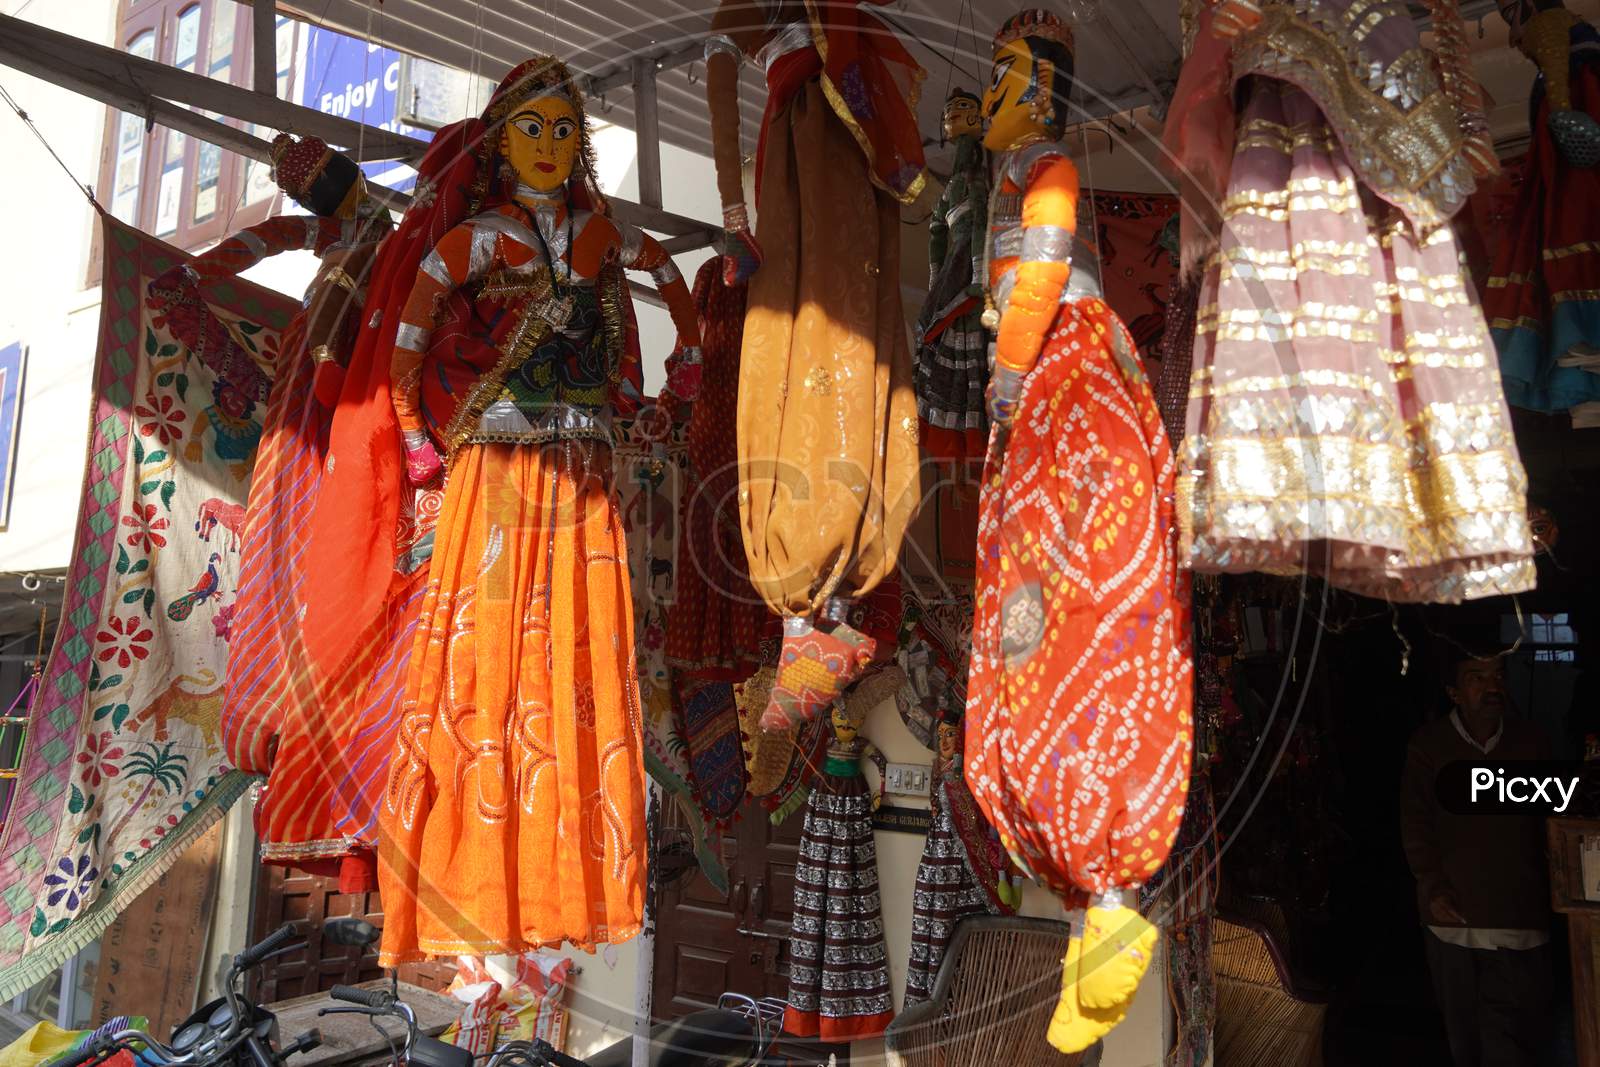 Souvenir Hand Made Colorful Rajasthan Puppets Displayed For Sale Outside A Shop. Traditional Indian Puppets. : Udaipur Rajasthan - March 2020